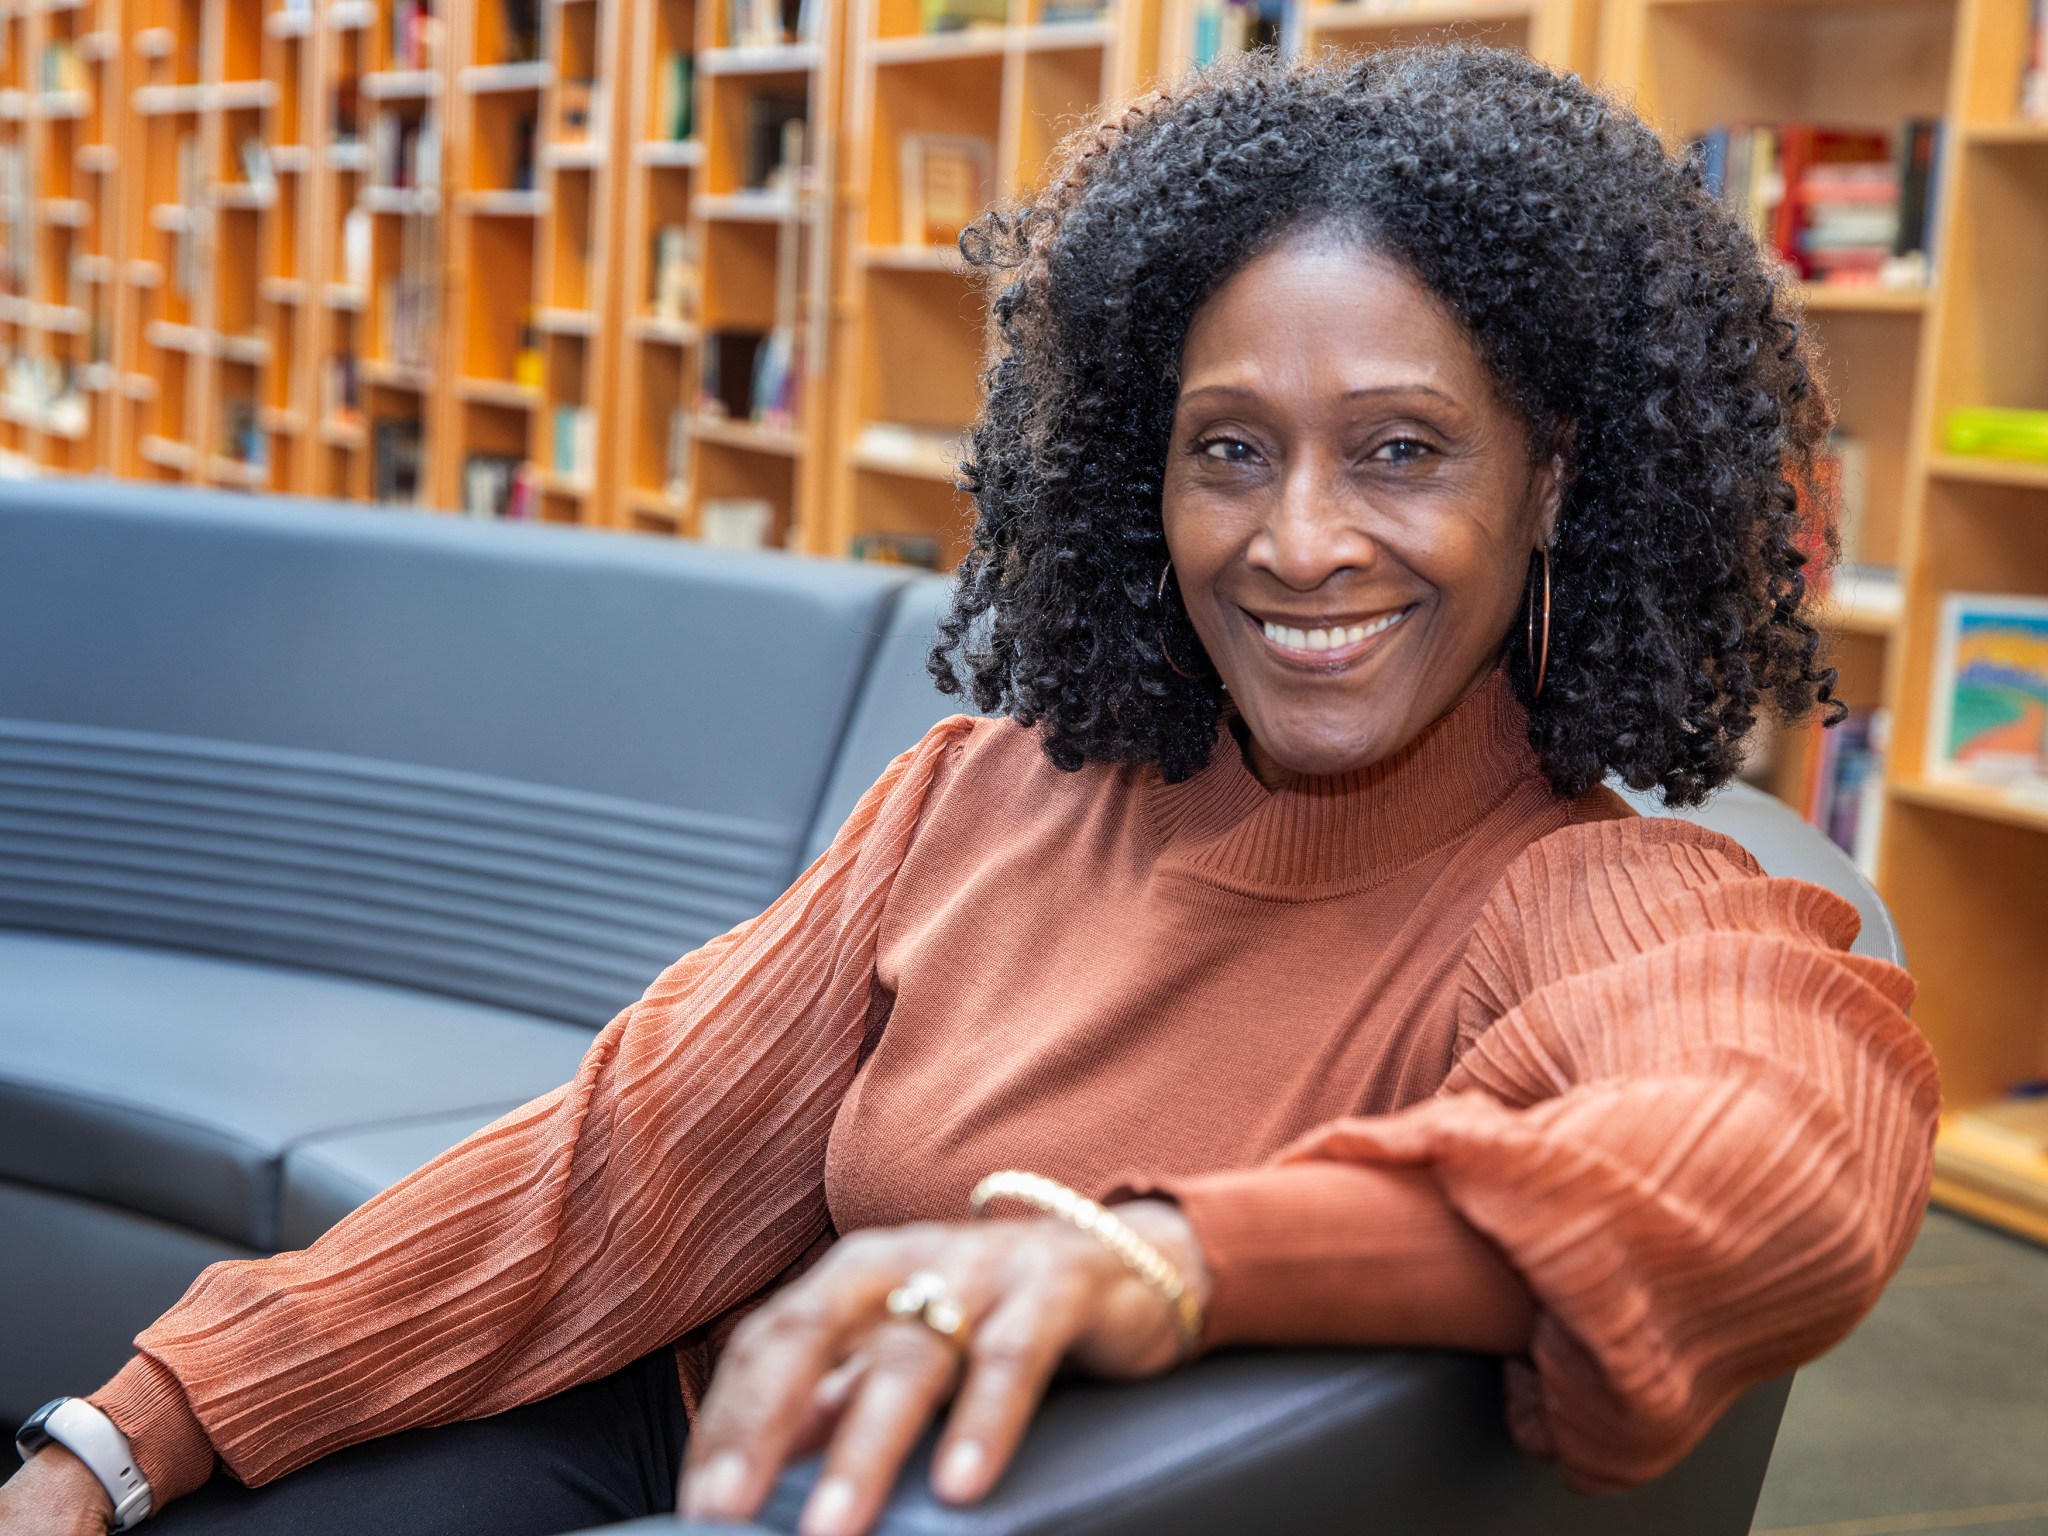 Gwendolyn Wheatle is an Administrative Assistant in the Office of STEM Engagement at NASA Langley Research Center. She is pictured in this photo smiling and wearing an orange blouse. Gwendolyn is sitting on a couch, and bookshelves can be seen in the background of the photo